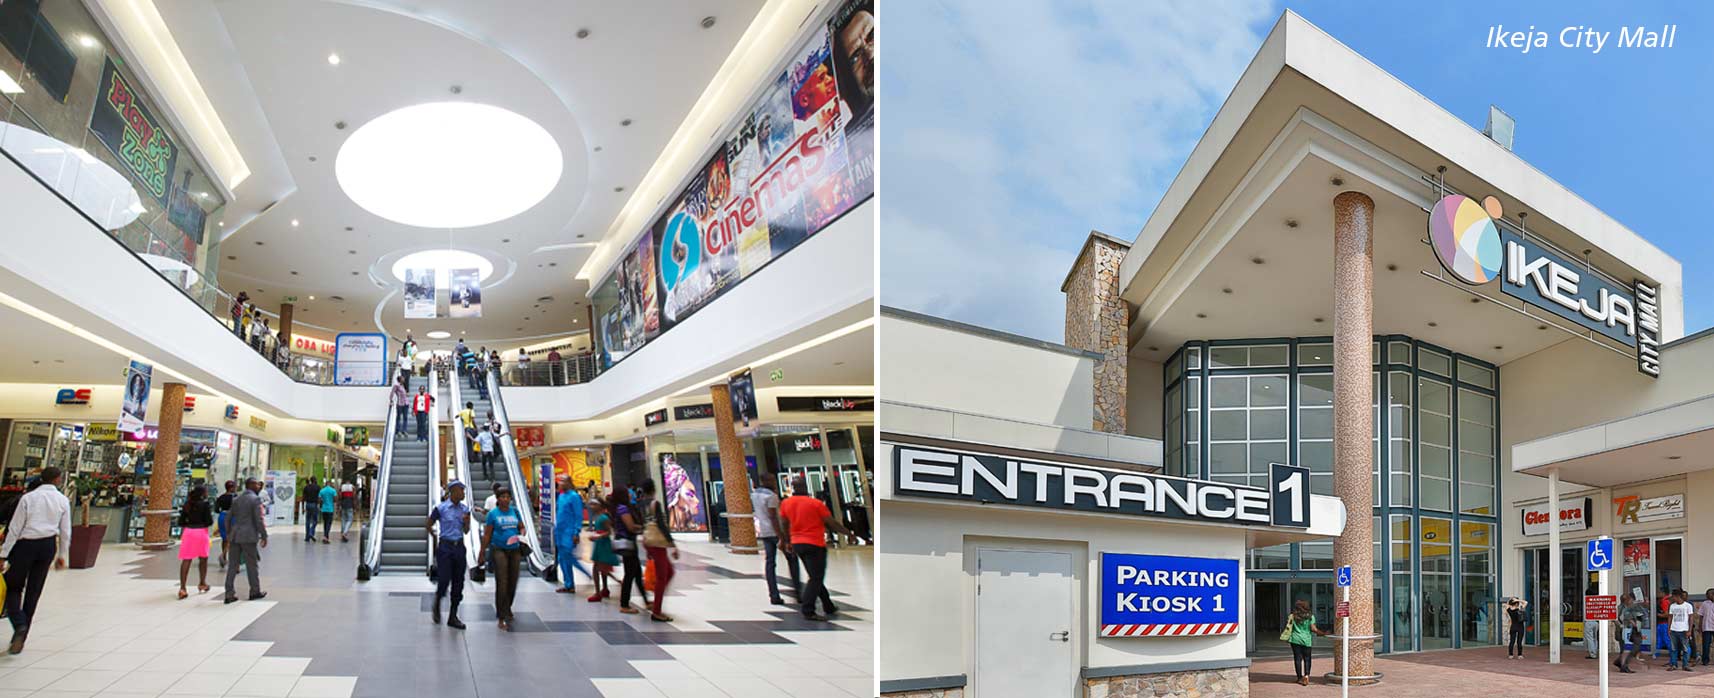 Ikeja City Mall will be sold to an undisclosed investor for $115 million